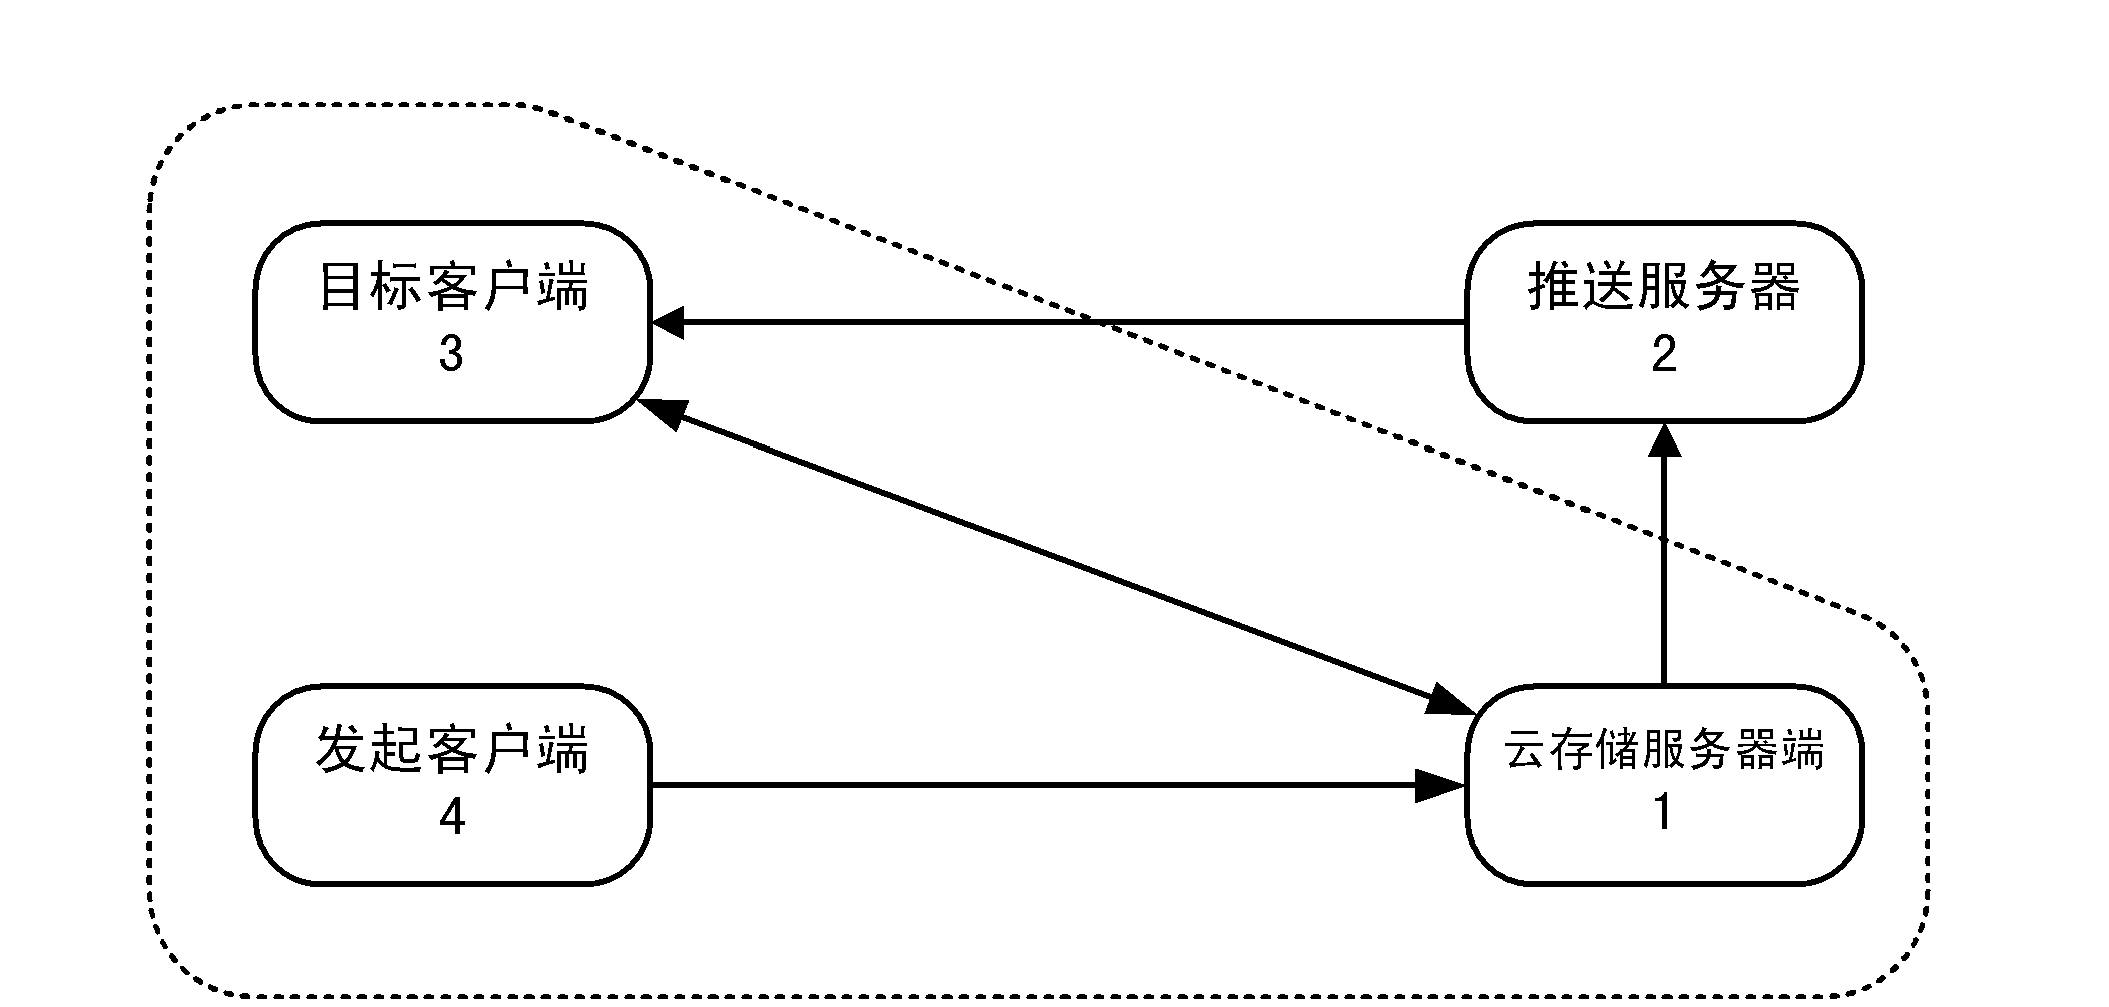 System capable of achieving browser data synchronization